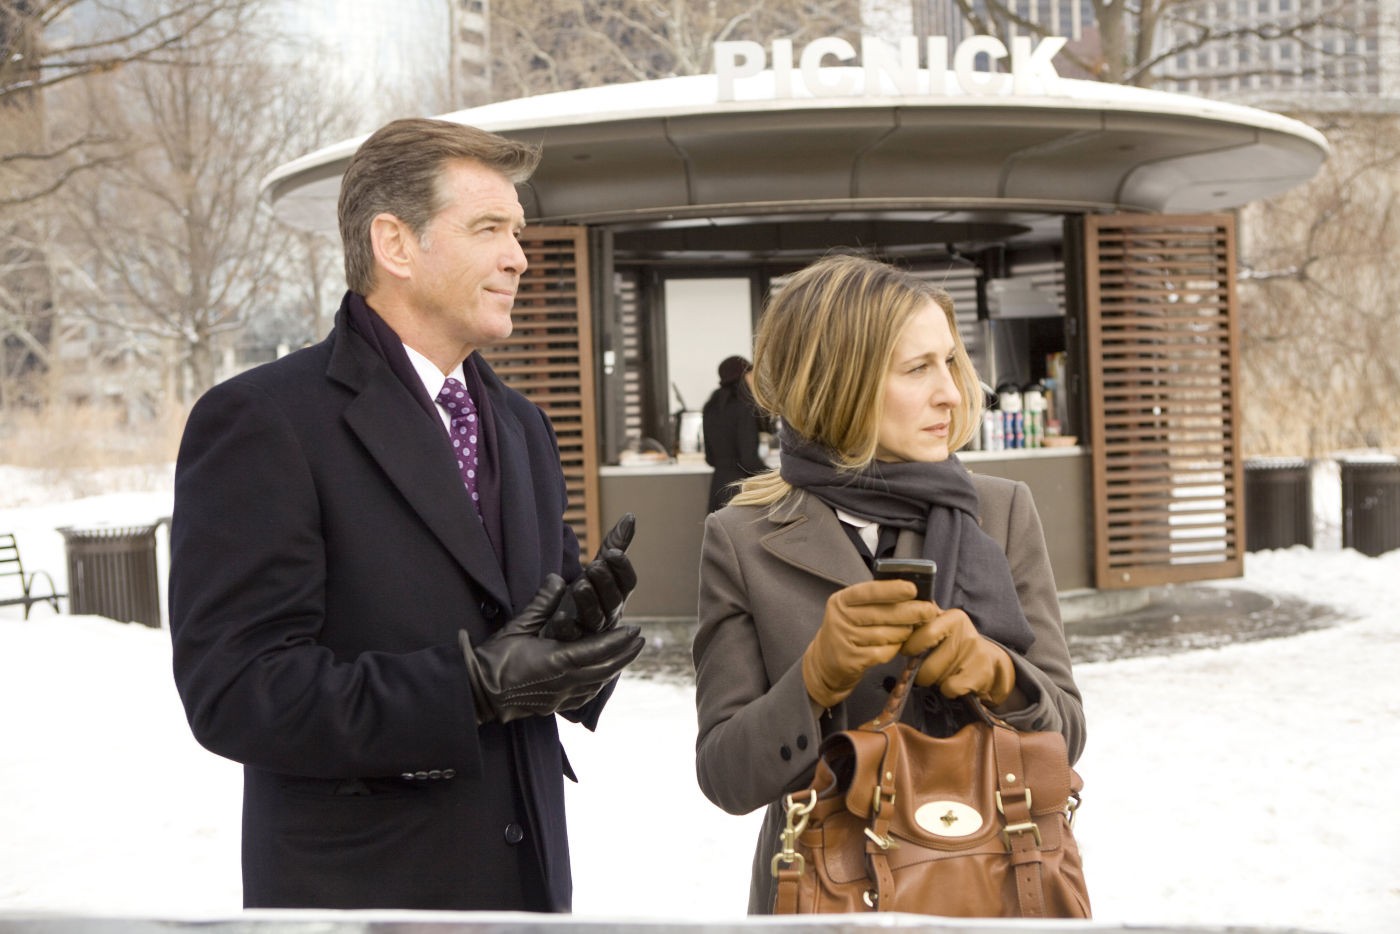 Pierce Brosnan stars as Jack Abelhammer and Sarah Jessica Parker stars as Kate Reddy in The Weinstein Company's I Don't Know How She Does It (2011